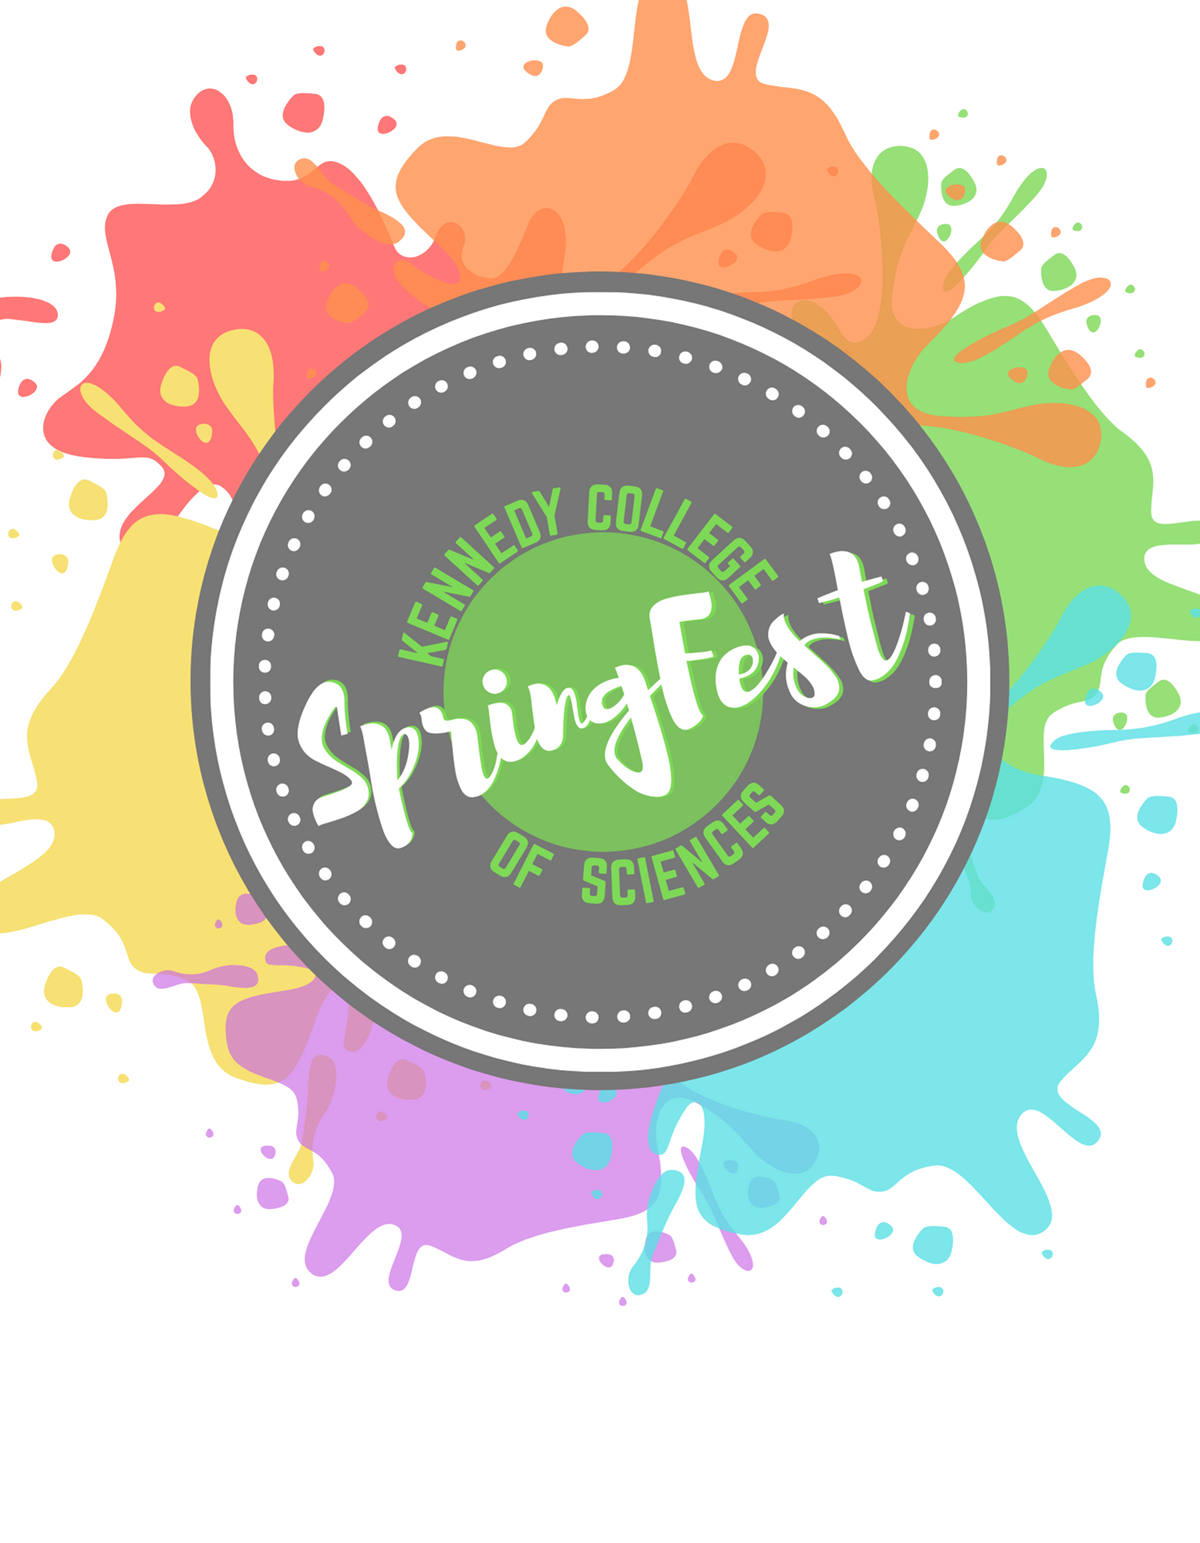 Logo: paint splashes with these words: Kennedy College of Sciences Spring Fest